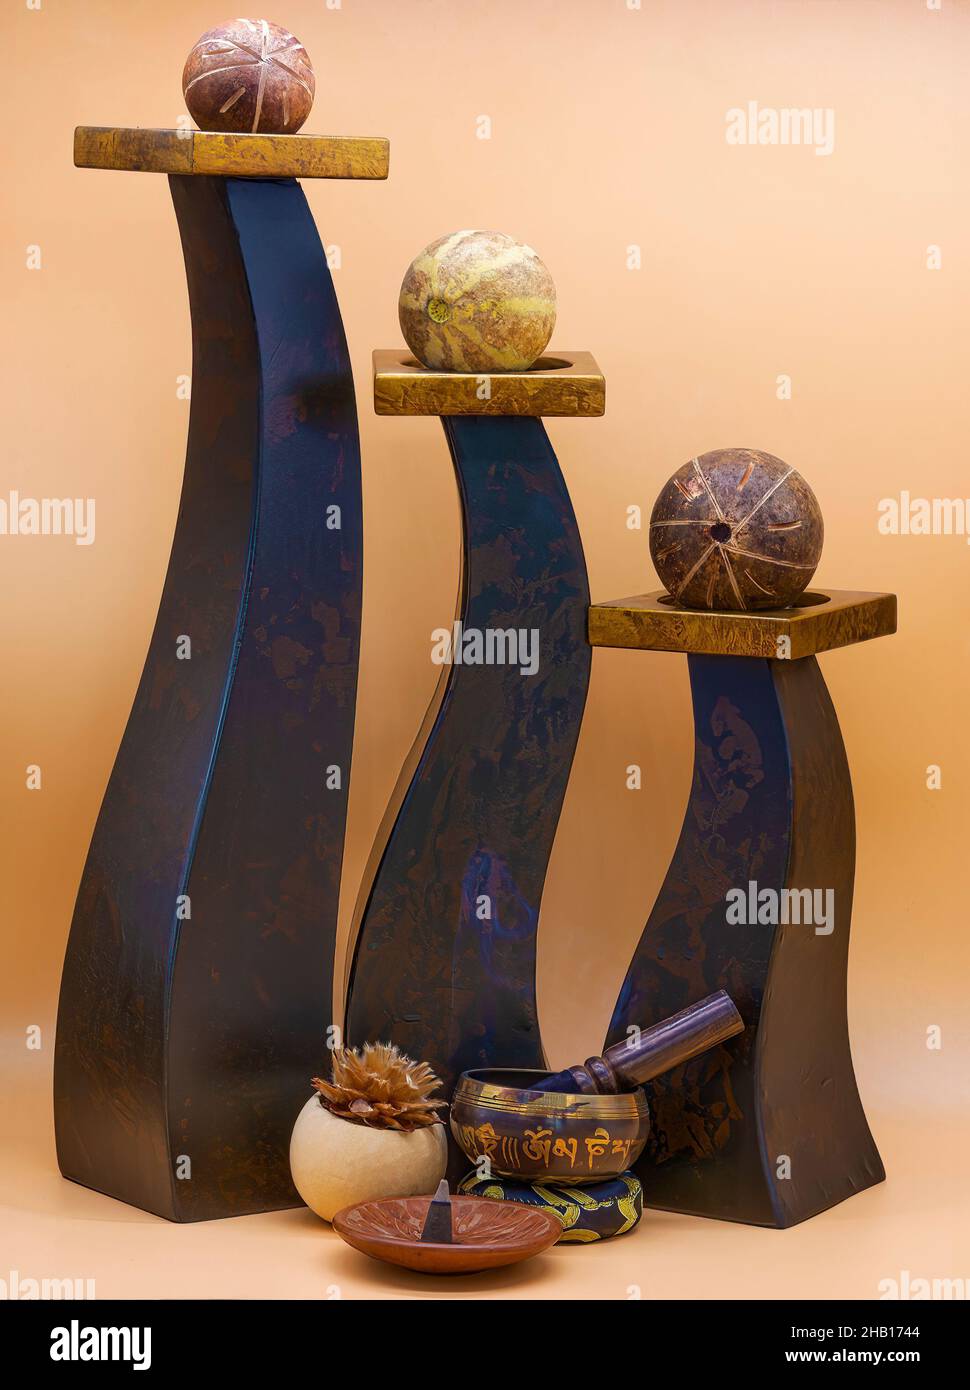 Zen still life with shapes, incense, singing bowl all to instill tranquility. Stock Photo